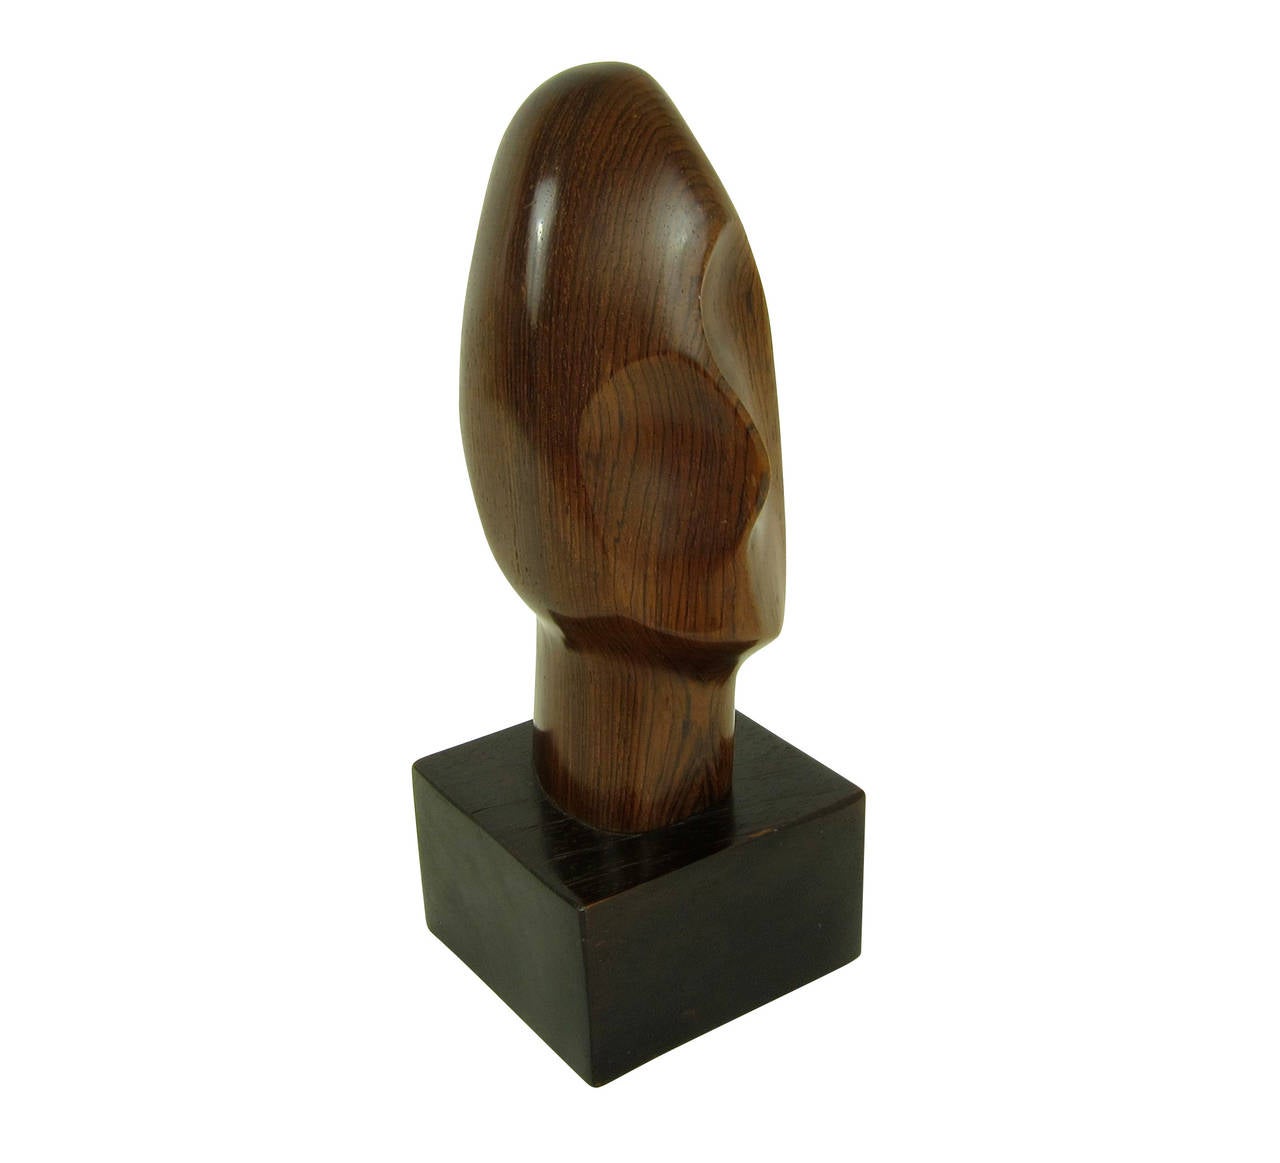 Beautifully stylized modernist visage by famous French artist Alexandre Noll.
This is a rare work and it is in excellent condition.
Stands 10 1/4" tall, and measures 3 3/4" x 3 3/4" width at the base.
Signed on the back.
Circa 1950's.